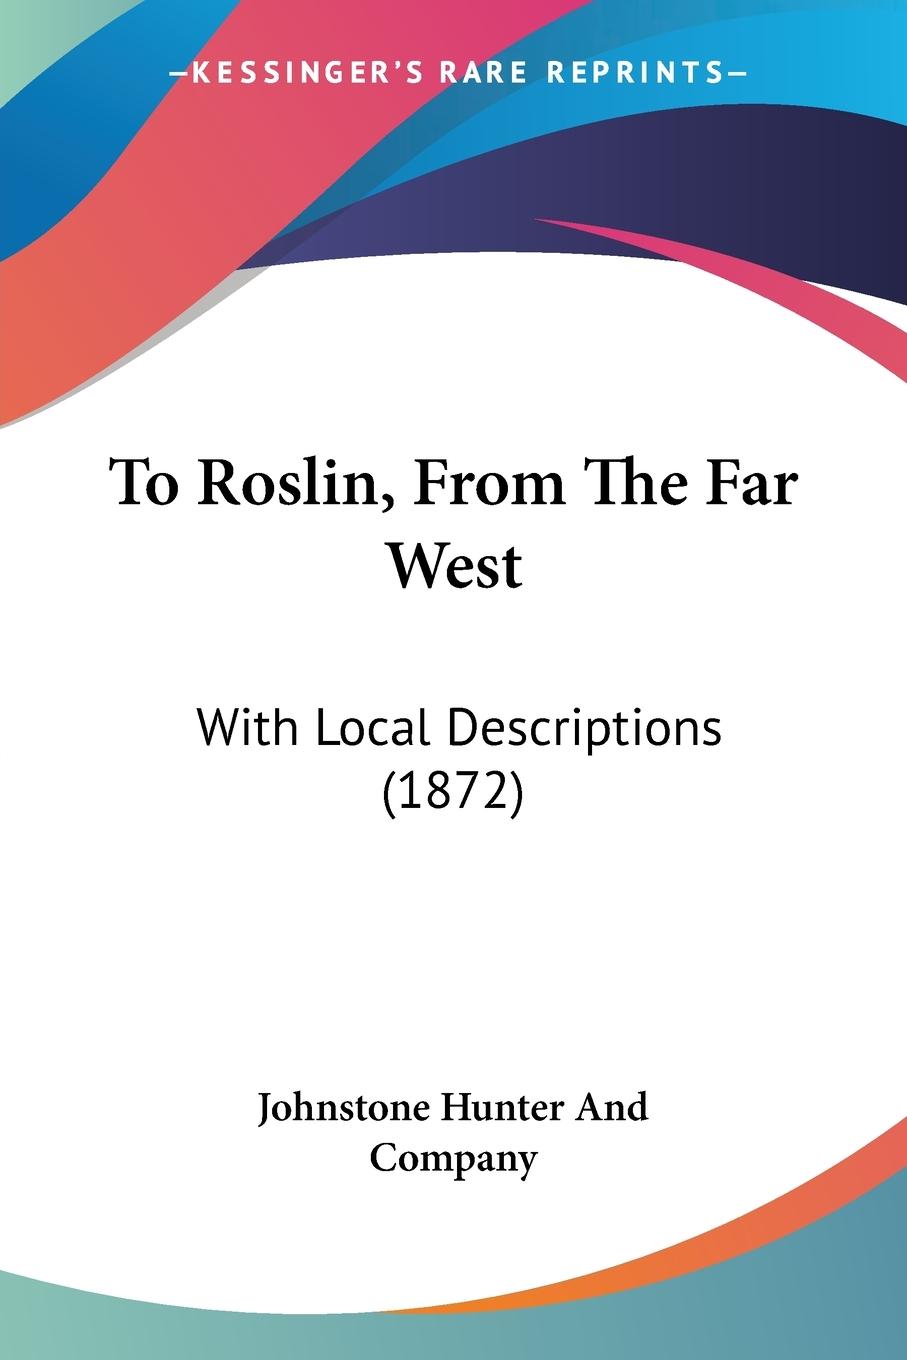 To Roslin, From The Far West - Johnstone Hunter And Company